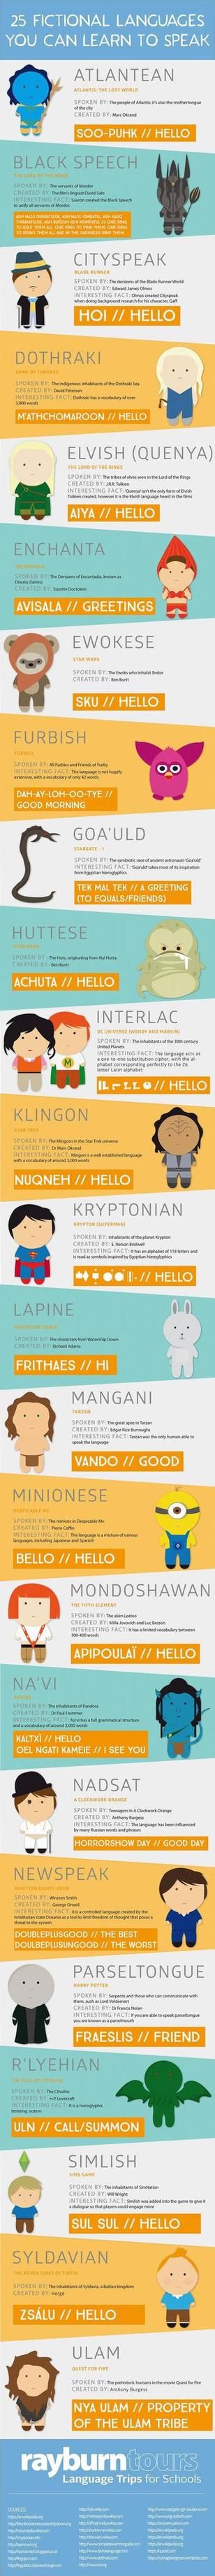 Educational infographic : How to say Hello in 25 Fictional Languages ...